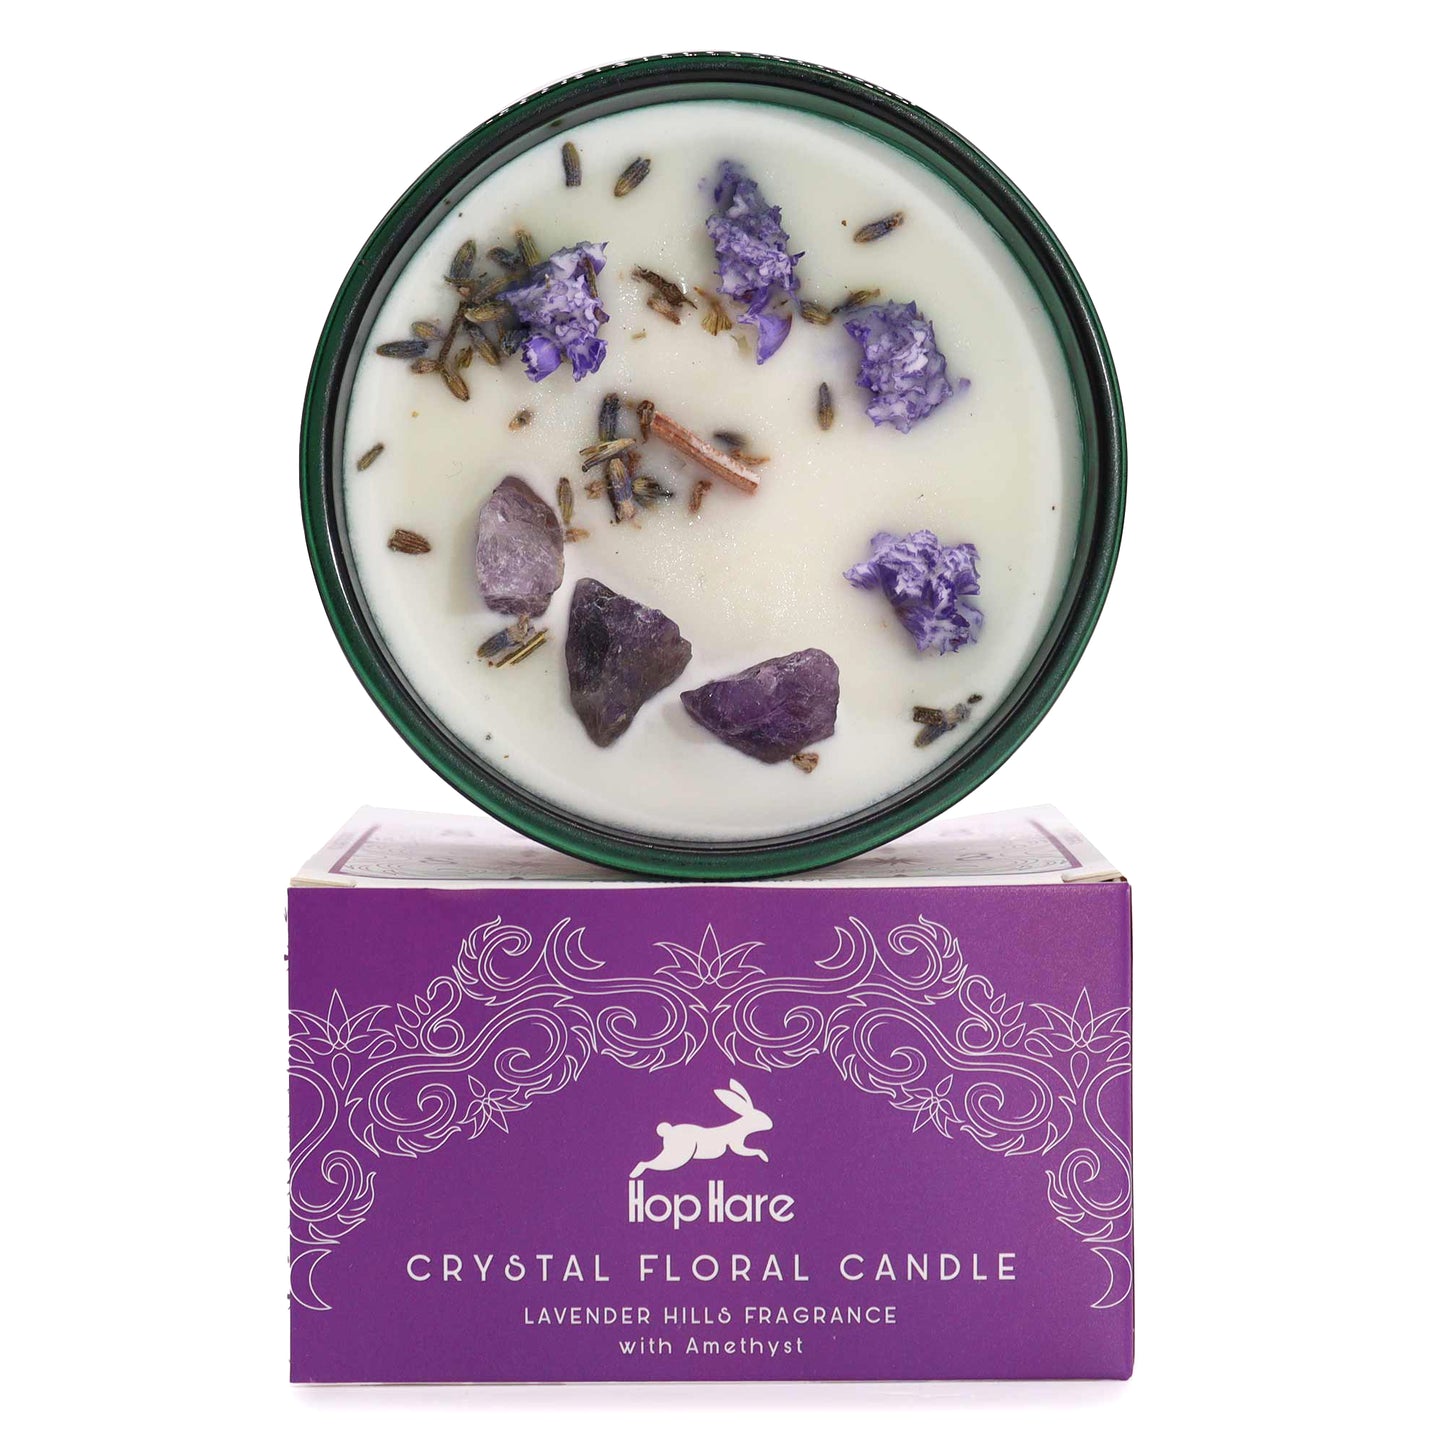 Hop Hare Crystal Magic Candle - The Moon